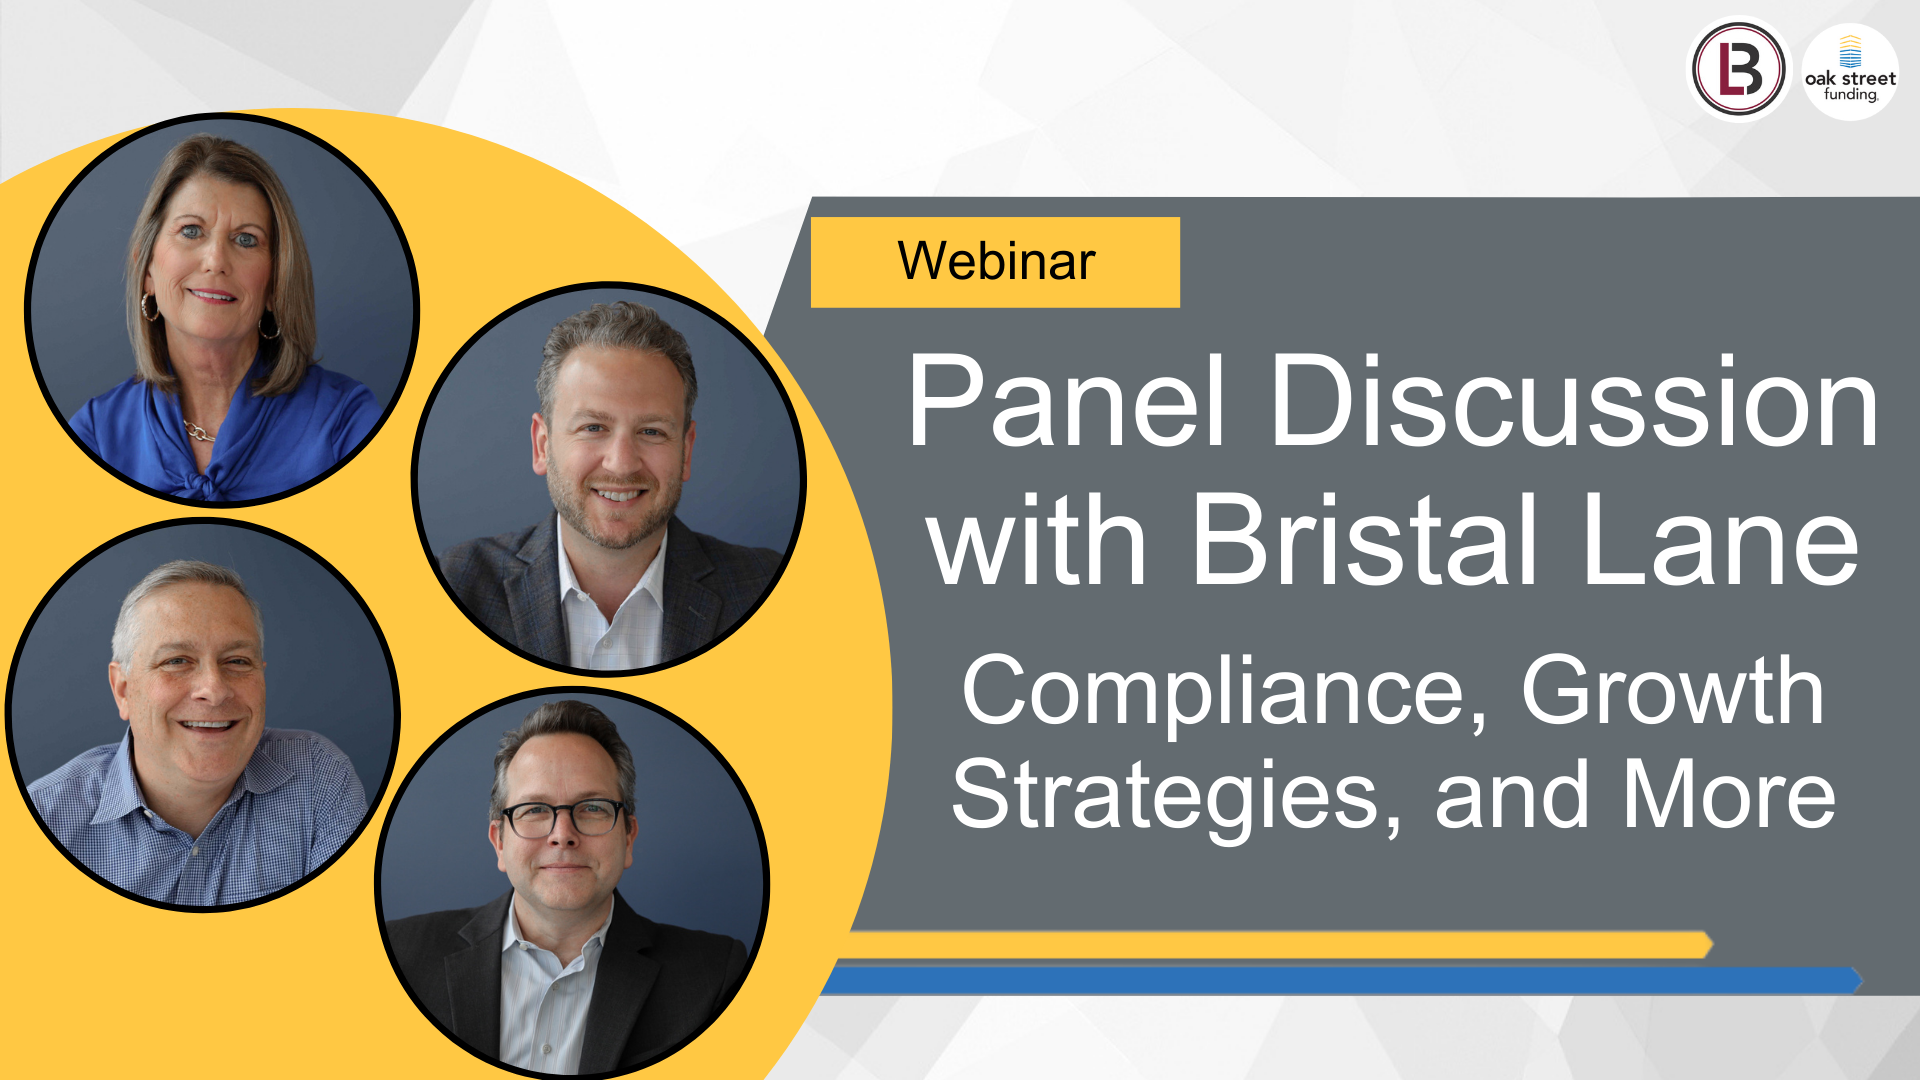 Panel Discussion with Bristal Lane: Compliance, Growth Strategies, and More